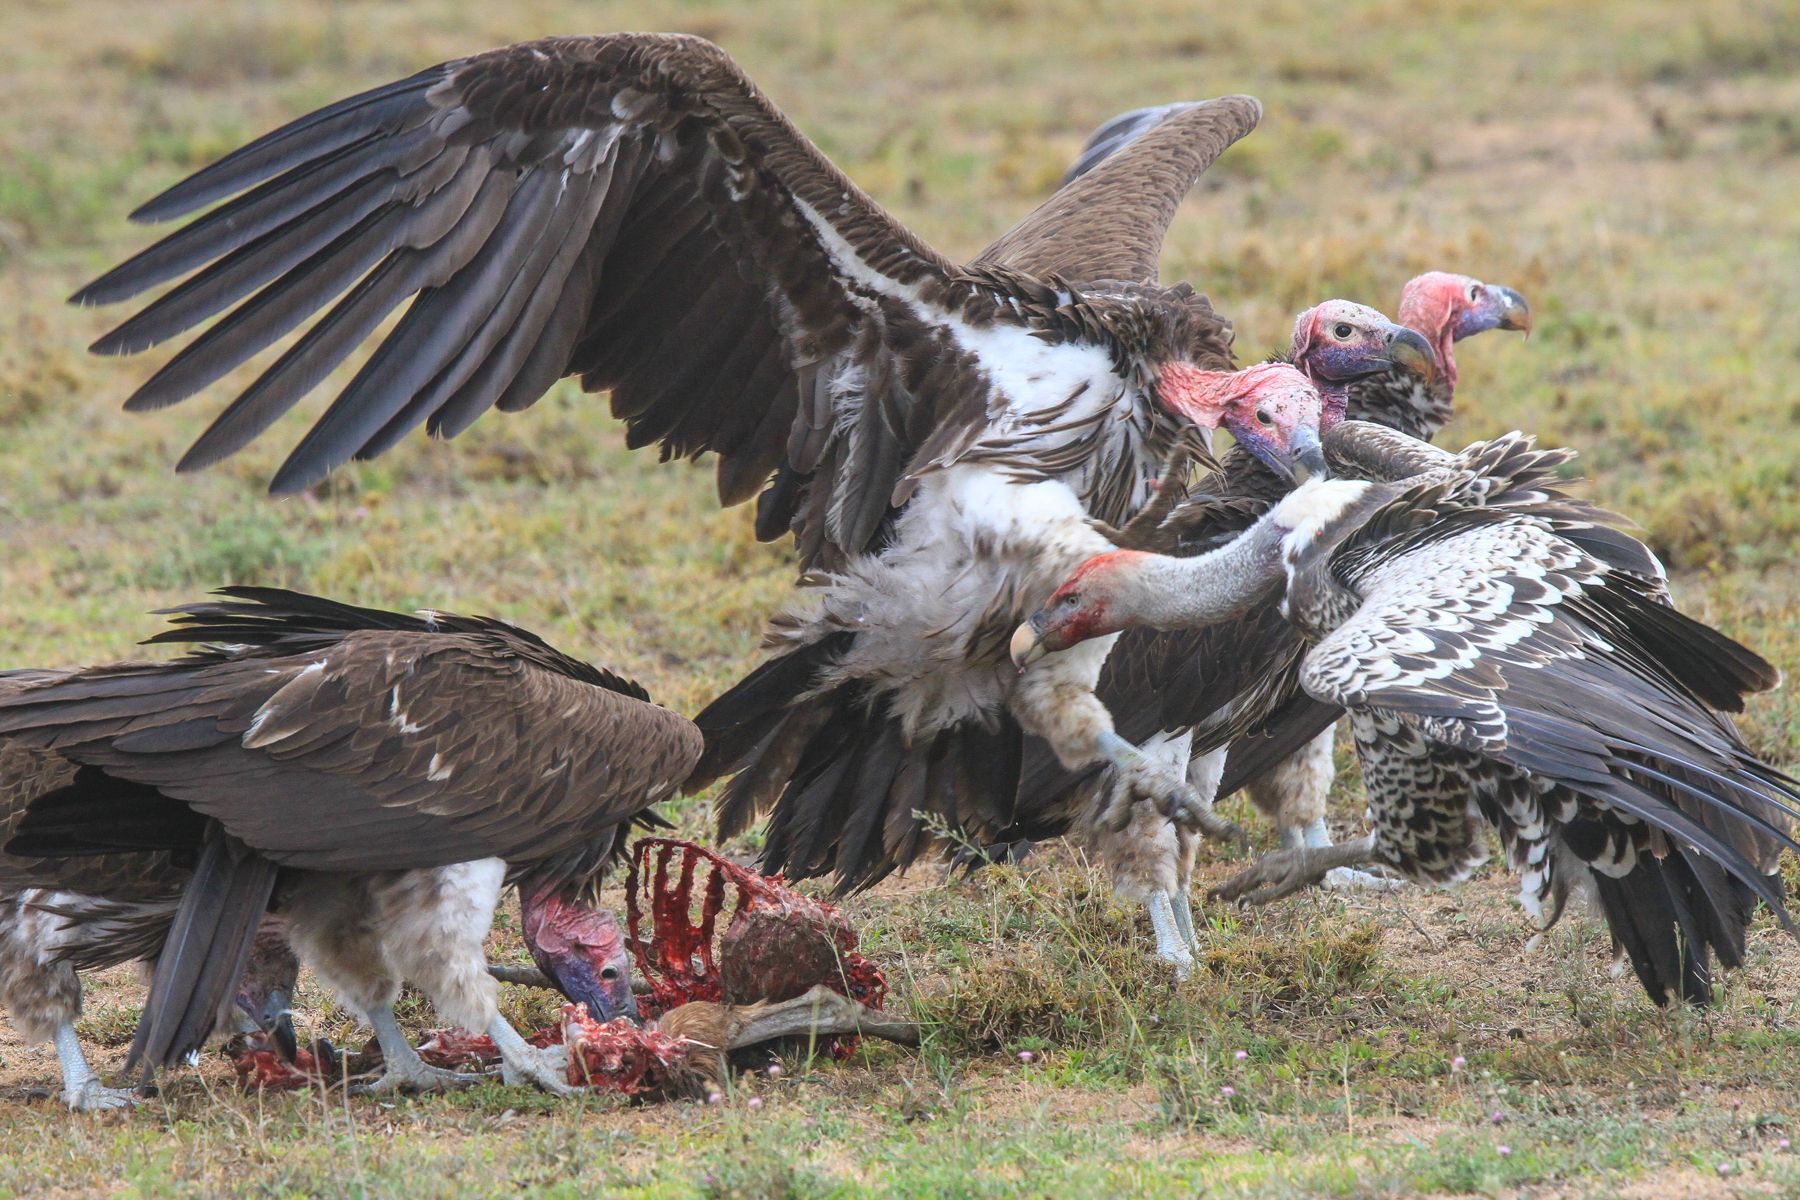 The Lappet-faced Vultures band together to discourage a smaller Rüppell's Vulture